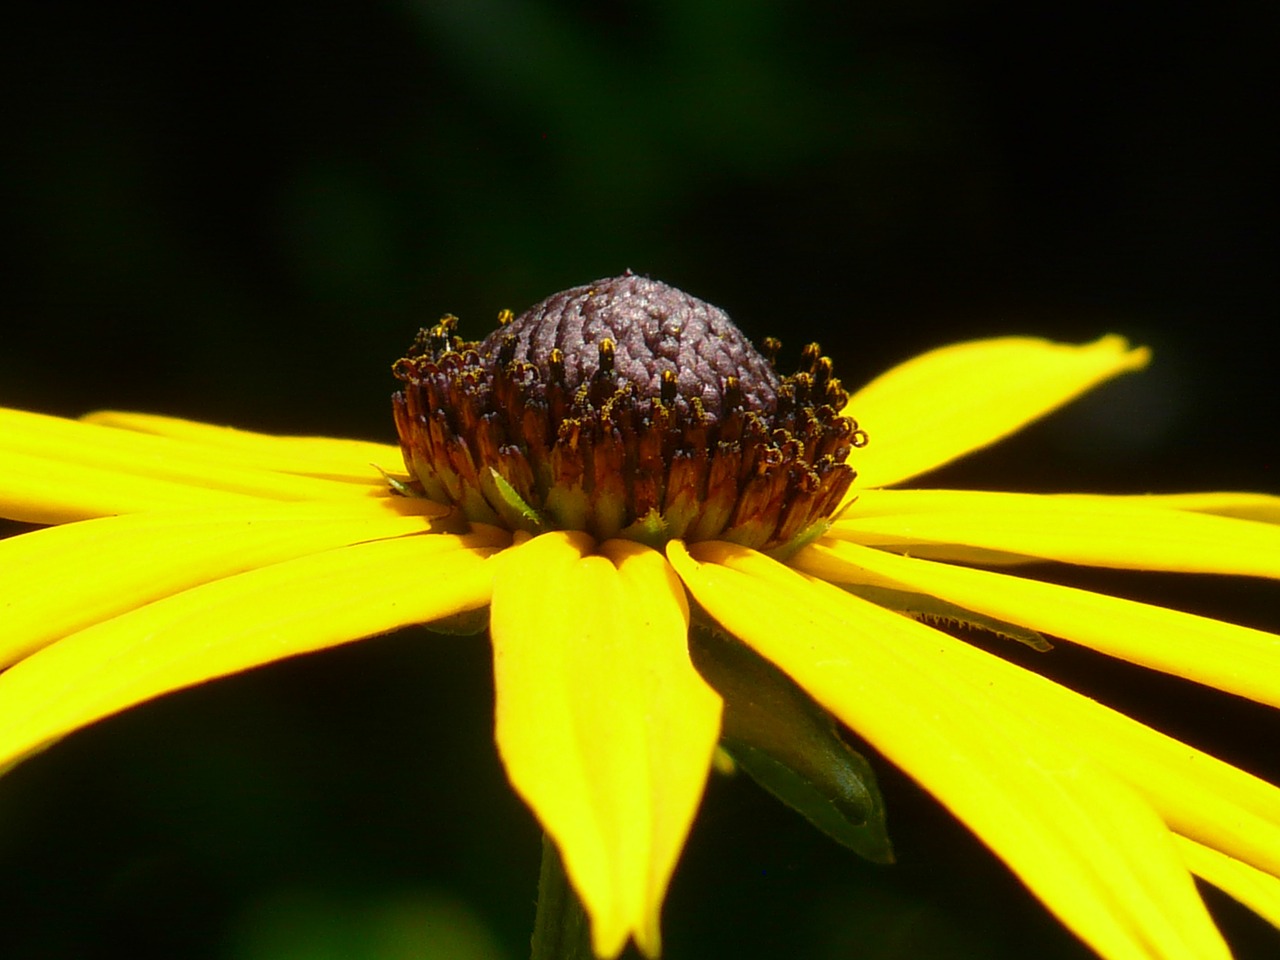 ordinary sonnenhut,flower,blossom,bloom,plant,yellow,rudbeckia fulgida,shining coneflower,rudbeckia,daisy family,asteraceae,free pictures, free photos, free images, royalty free, free illustrations, public domain